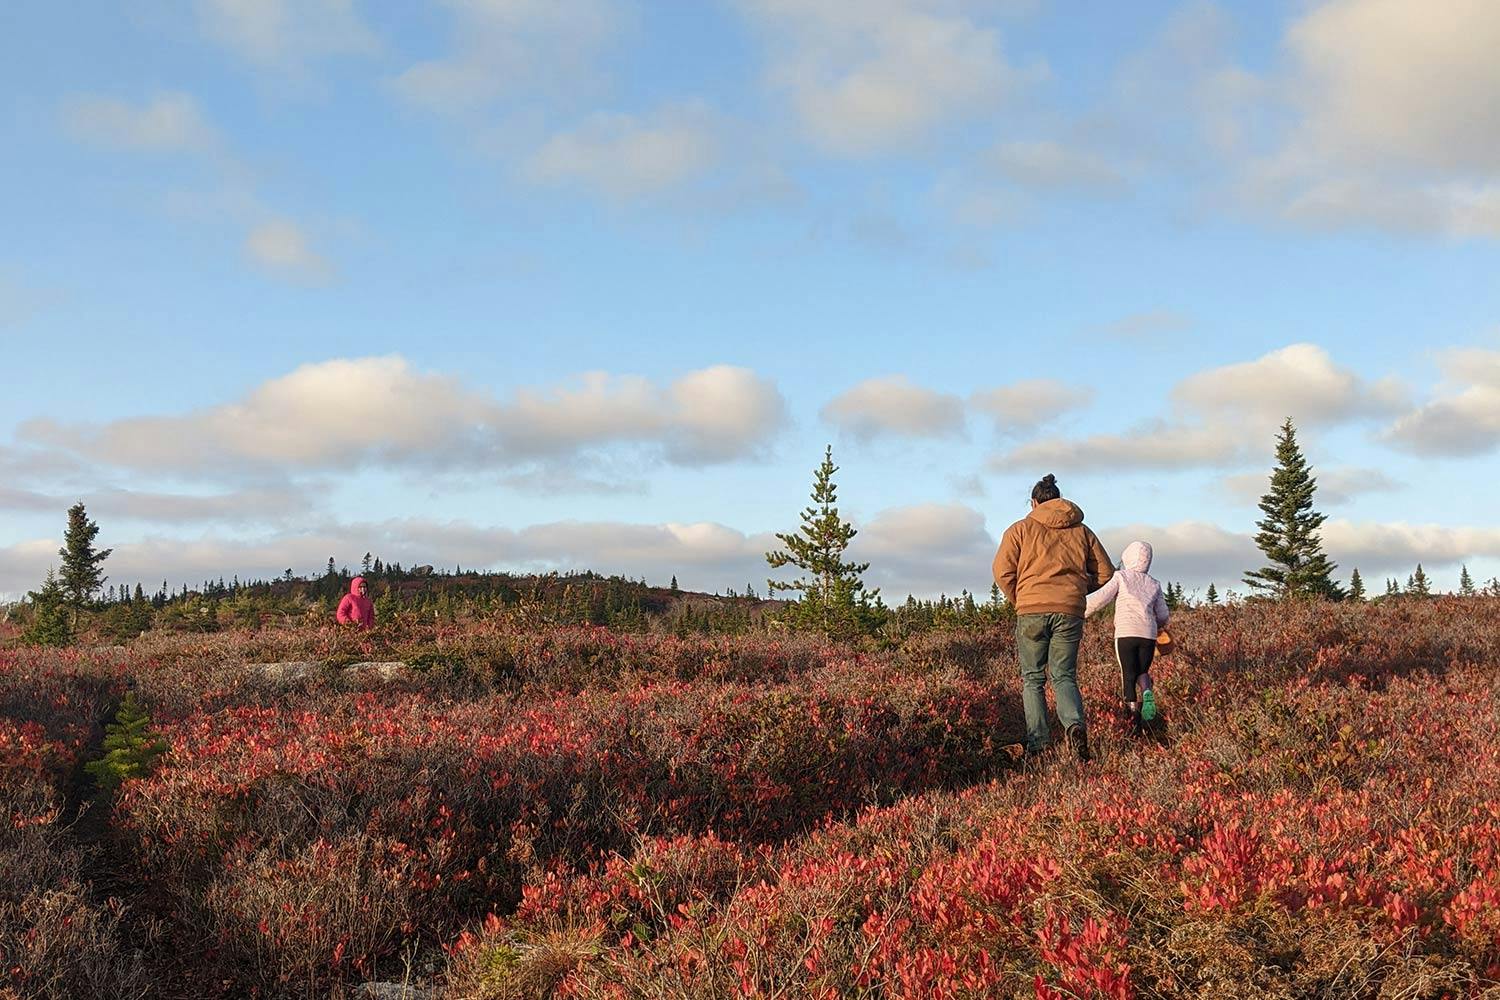 An adult and child in winter jackets walk through a cranberry field on a clear day in Nova Scotia.